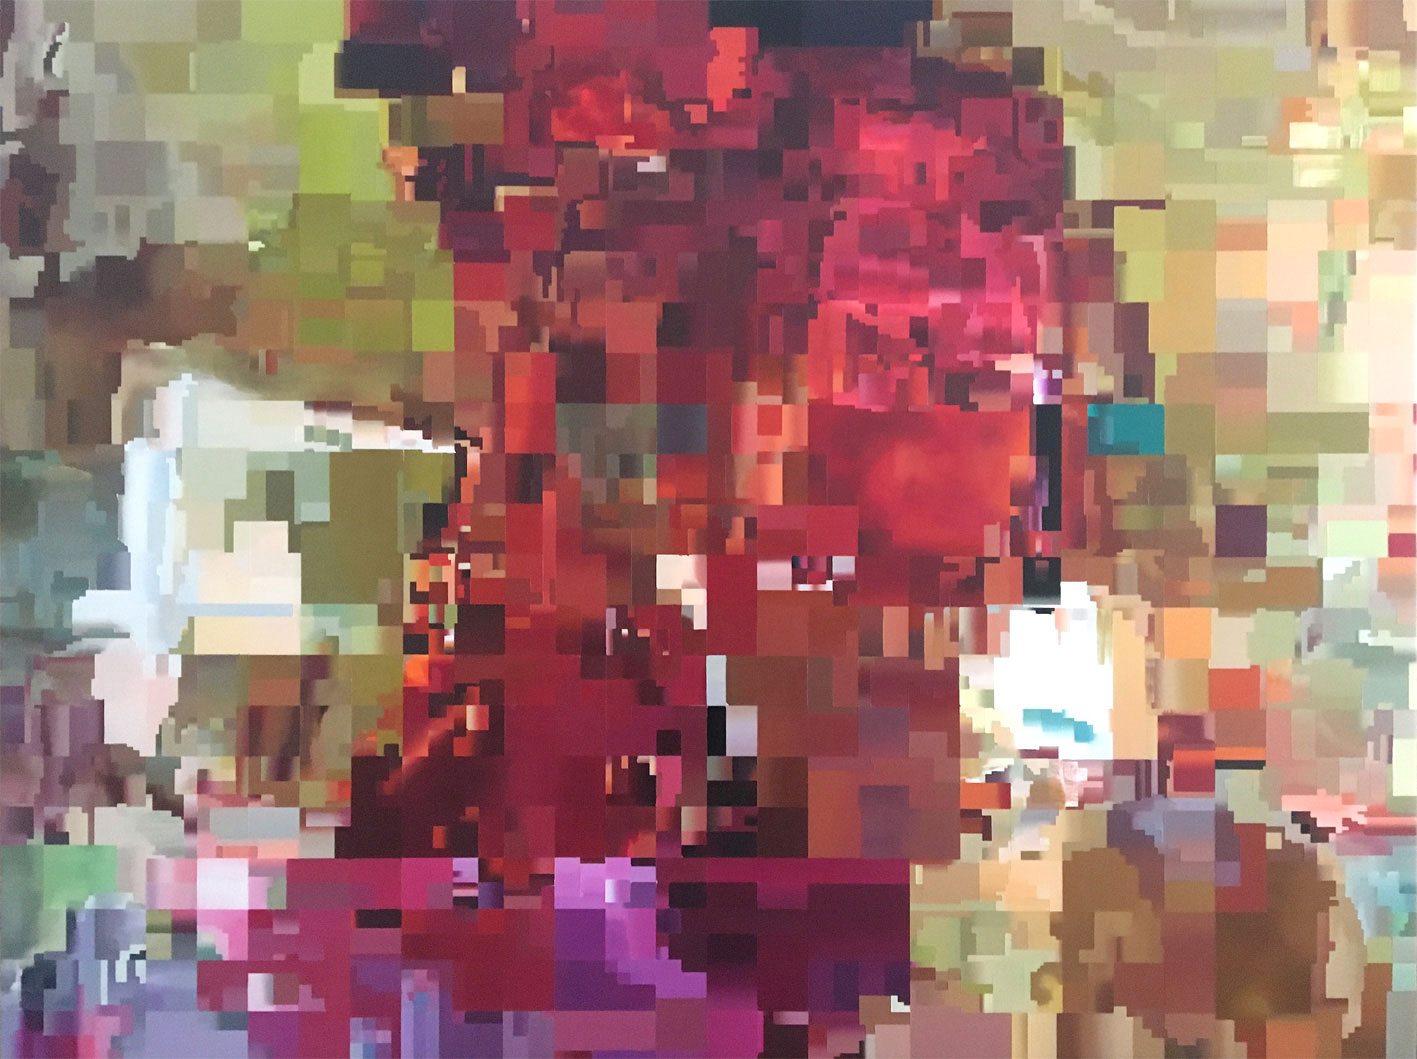 Oil painting by artist and painter Paul Lemmon in rich colours of olive, red and gold depicting a pixelated frame from a glitched digital video